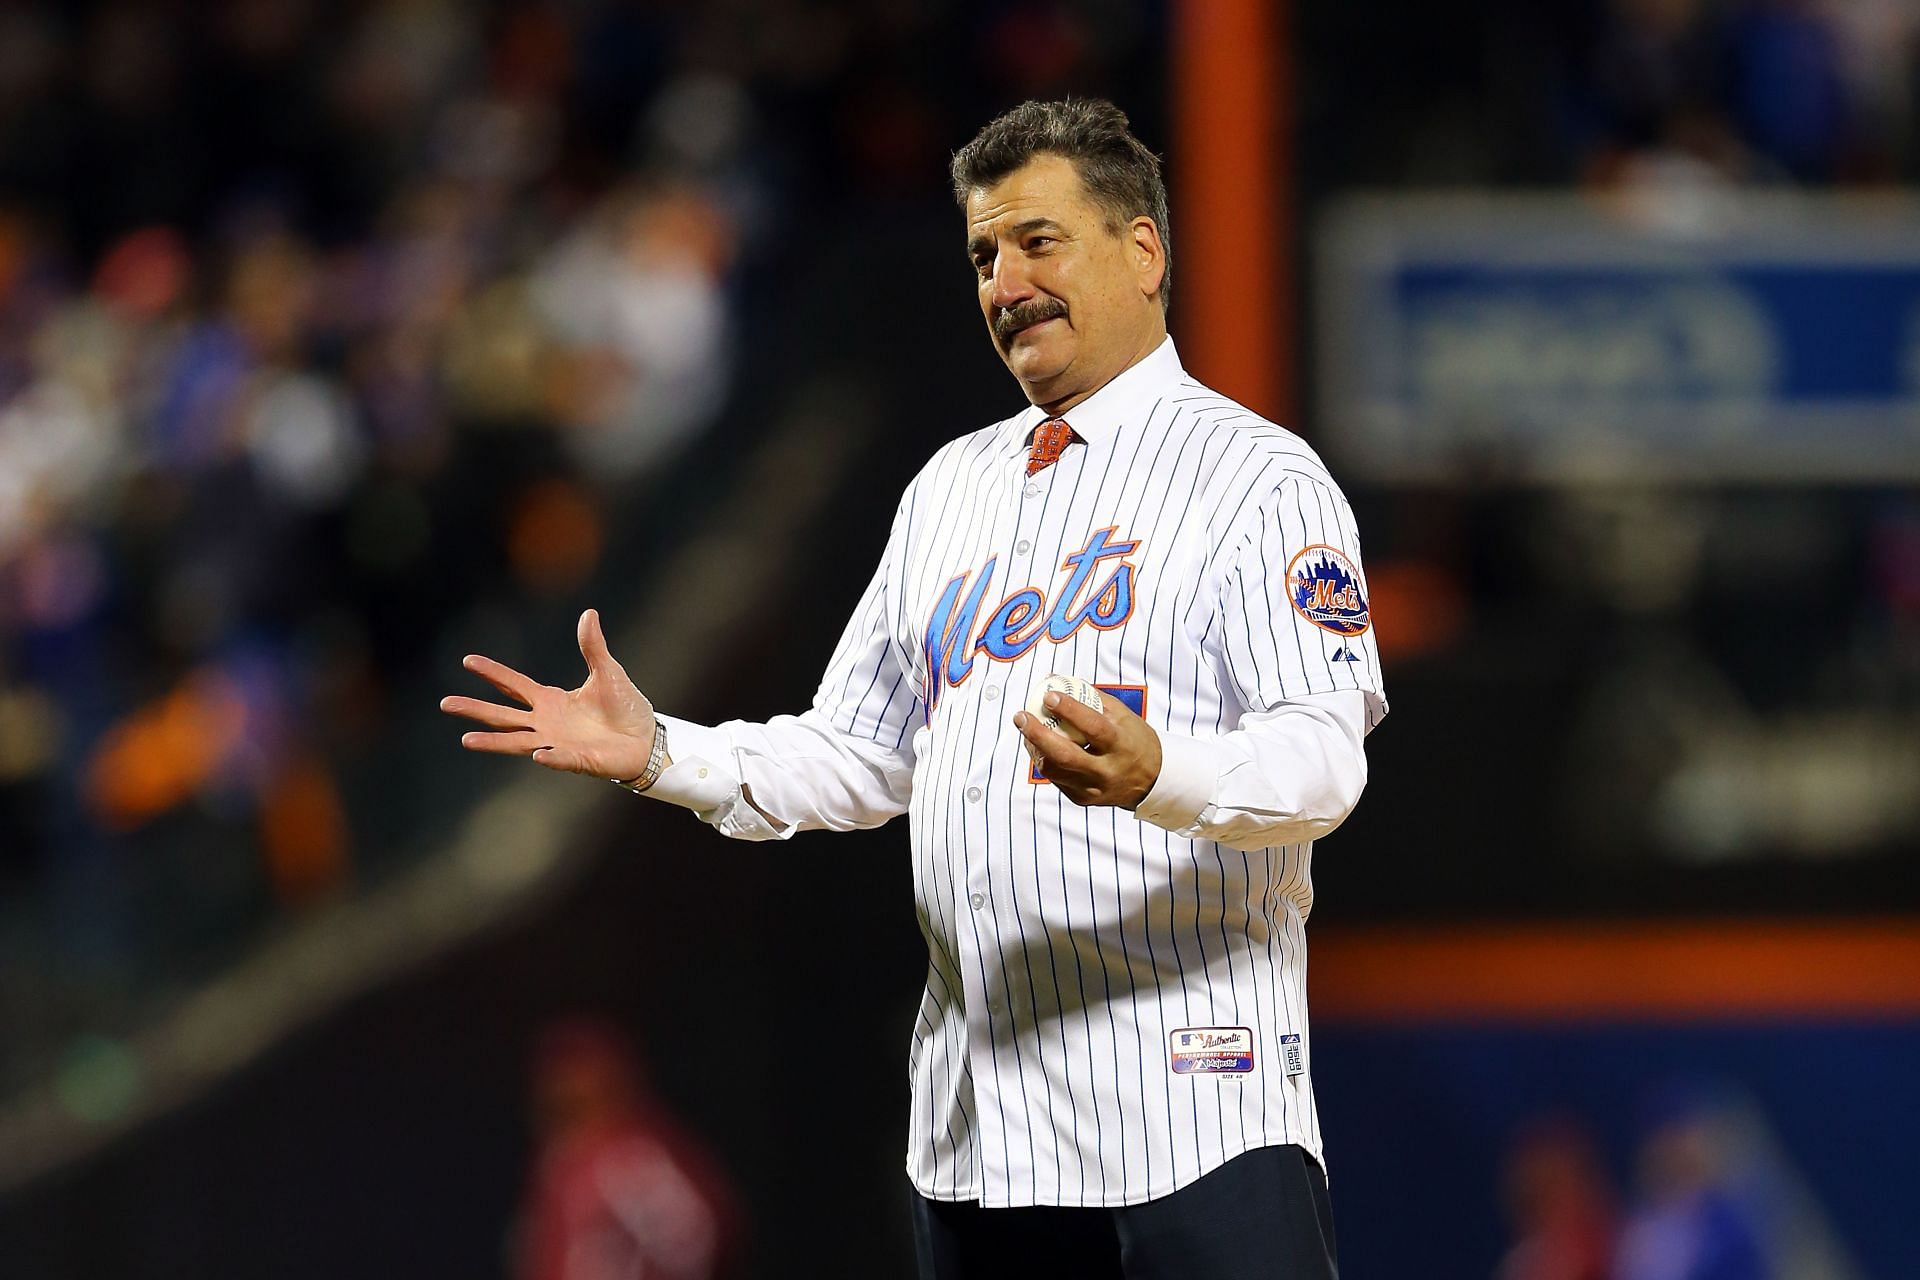 When former New York Mets star Keith Hernandez opened up about his